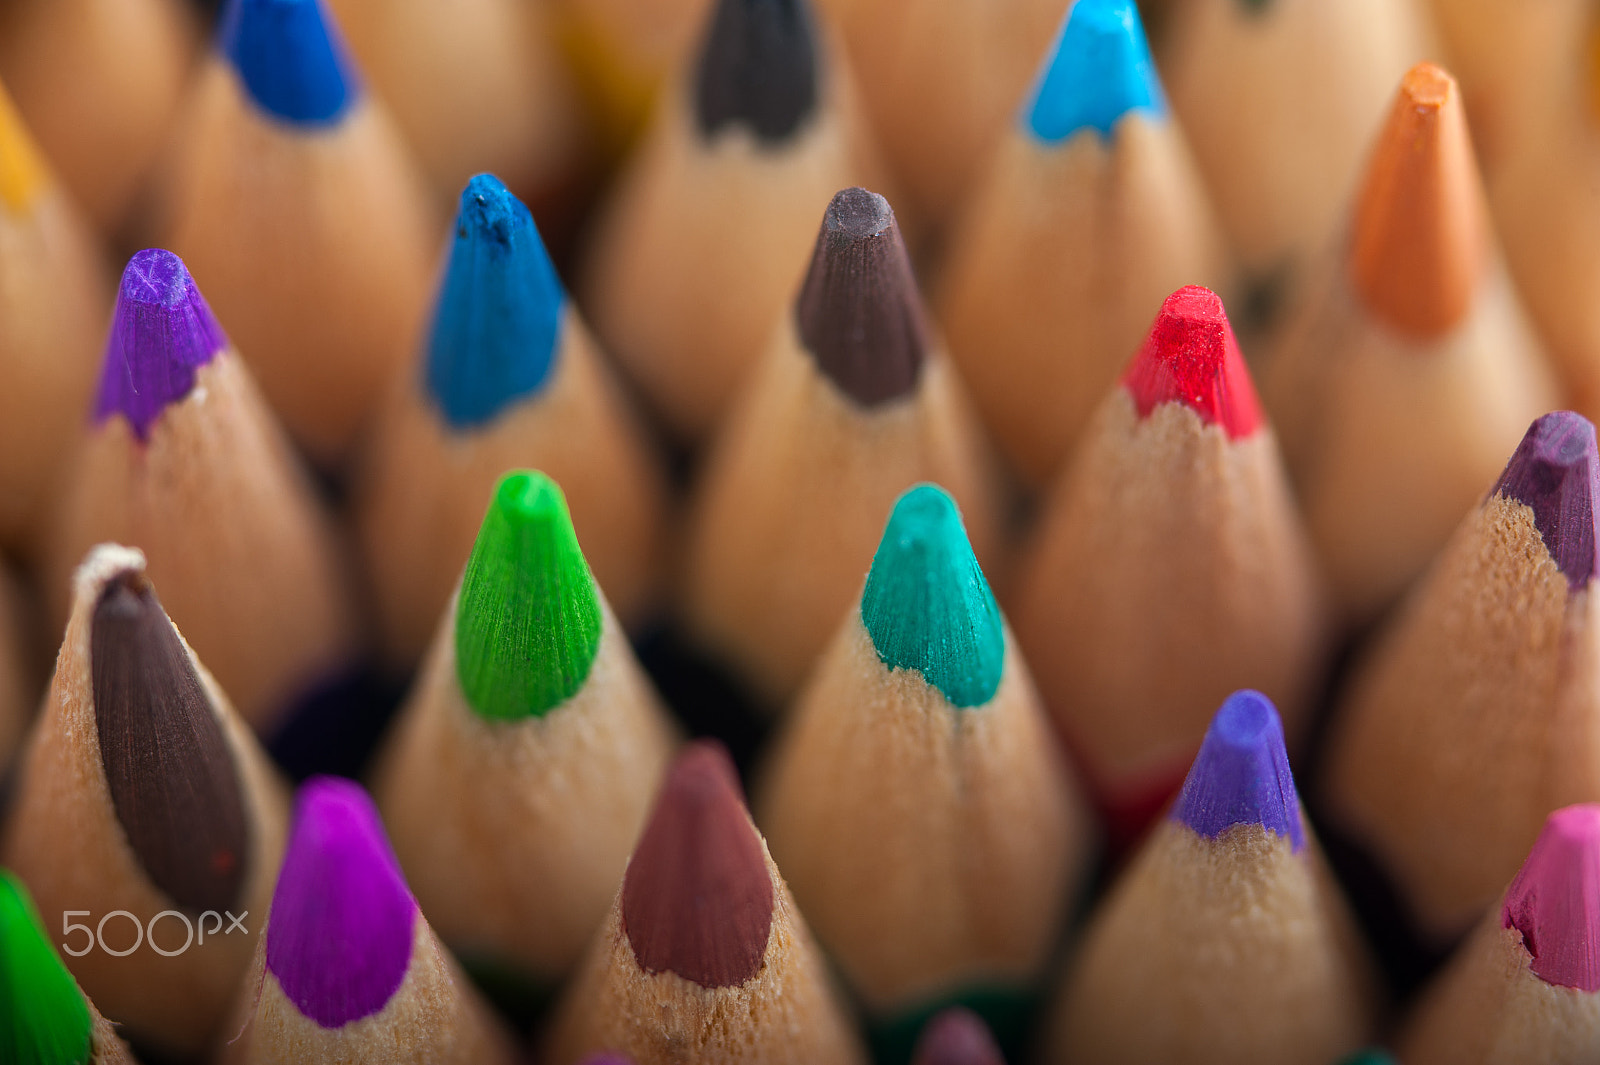 AF Micro-Nikkor 105mm f/2.8 sample photo. Group of multicolored wooden crayons photography